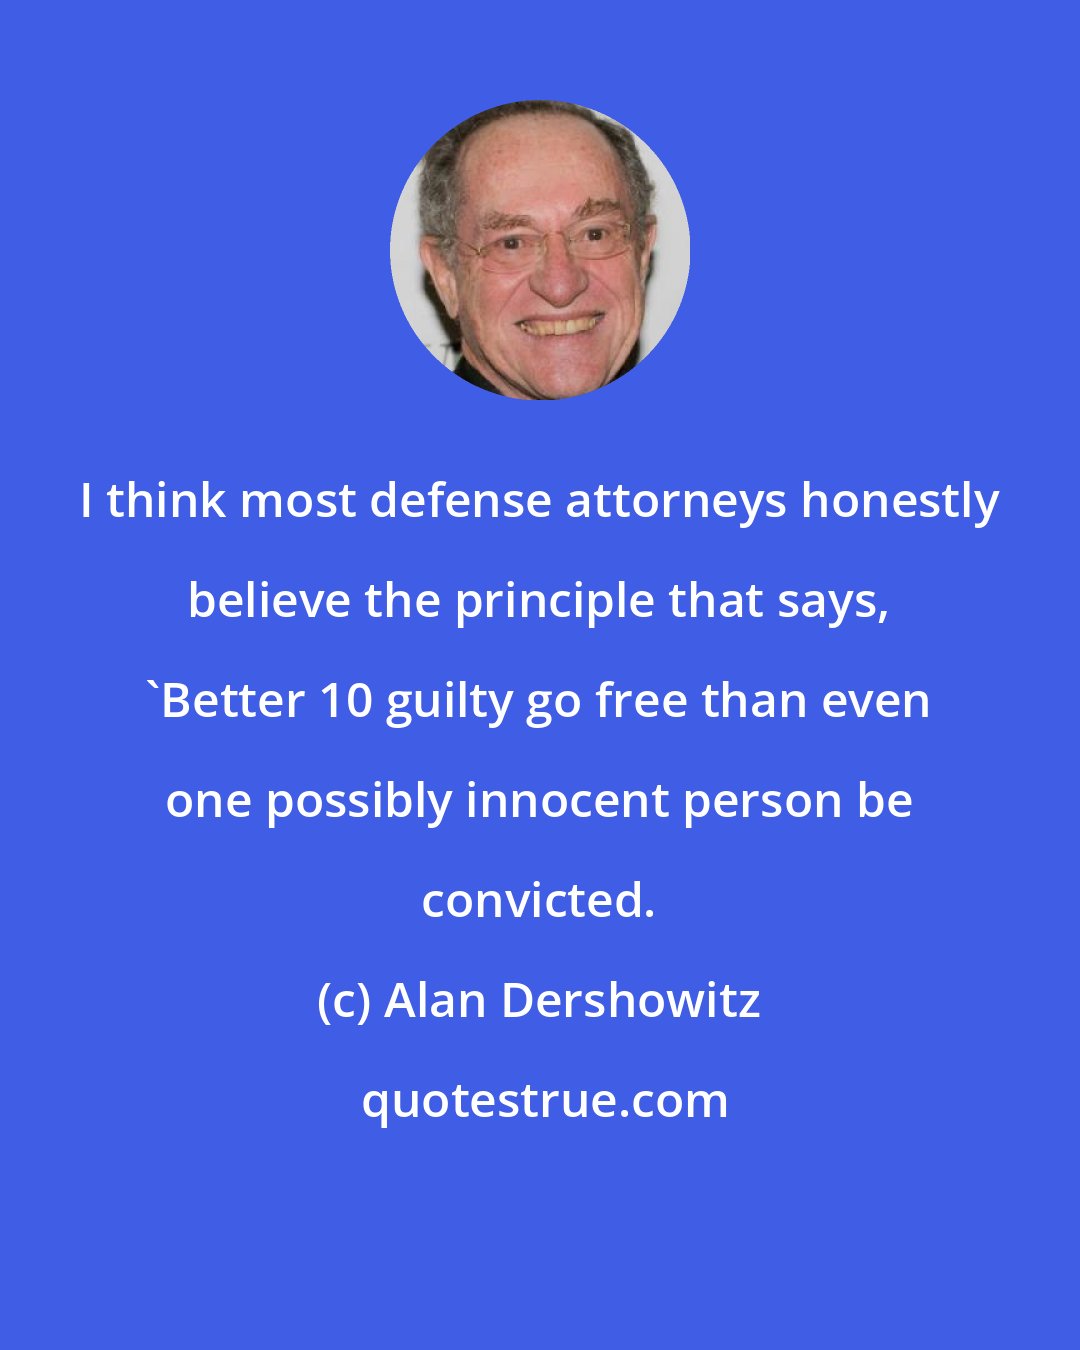 Alan Dershowitz: I think most defense attorneys honestly believe the principle that says, 'Better 10 guilty go free than even one possibly innocent person be convicted.